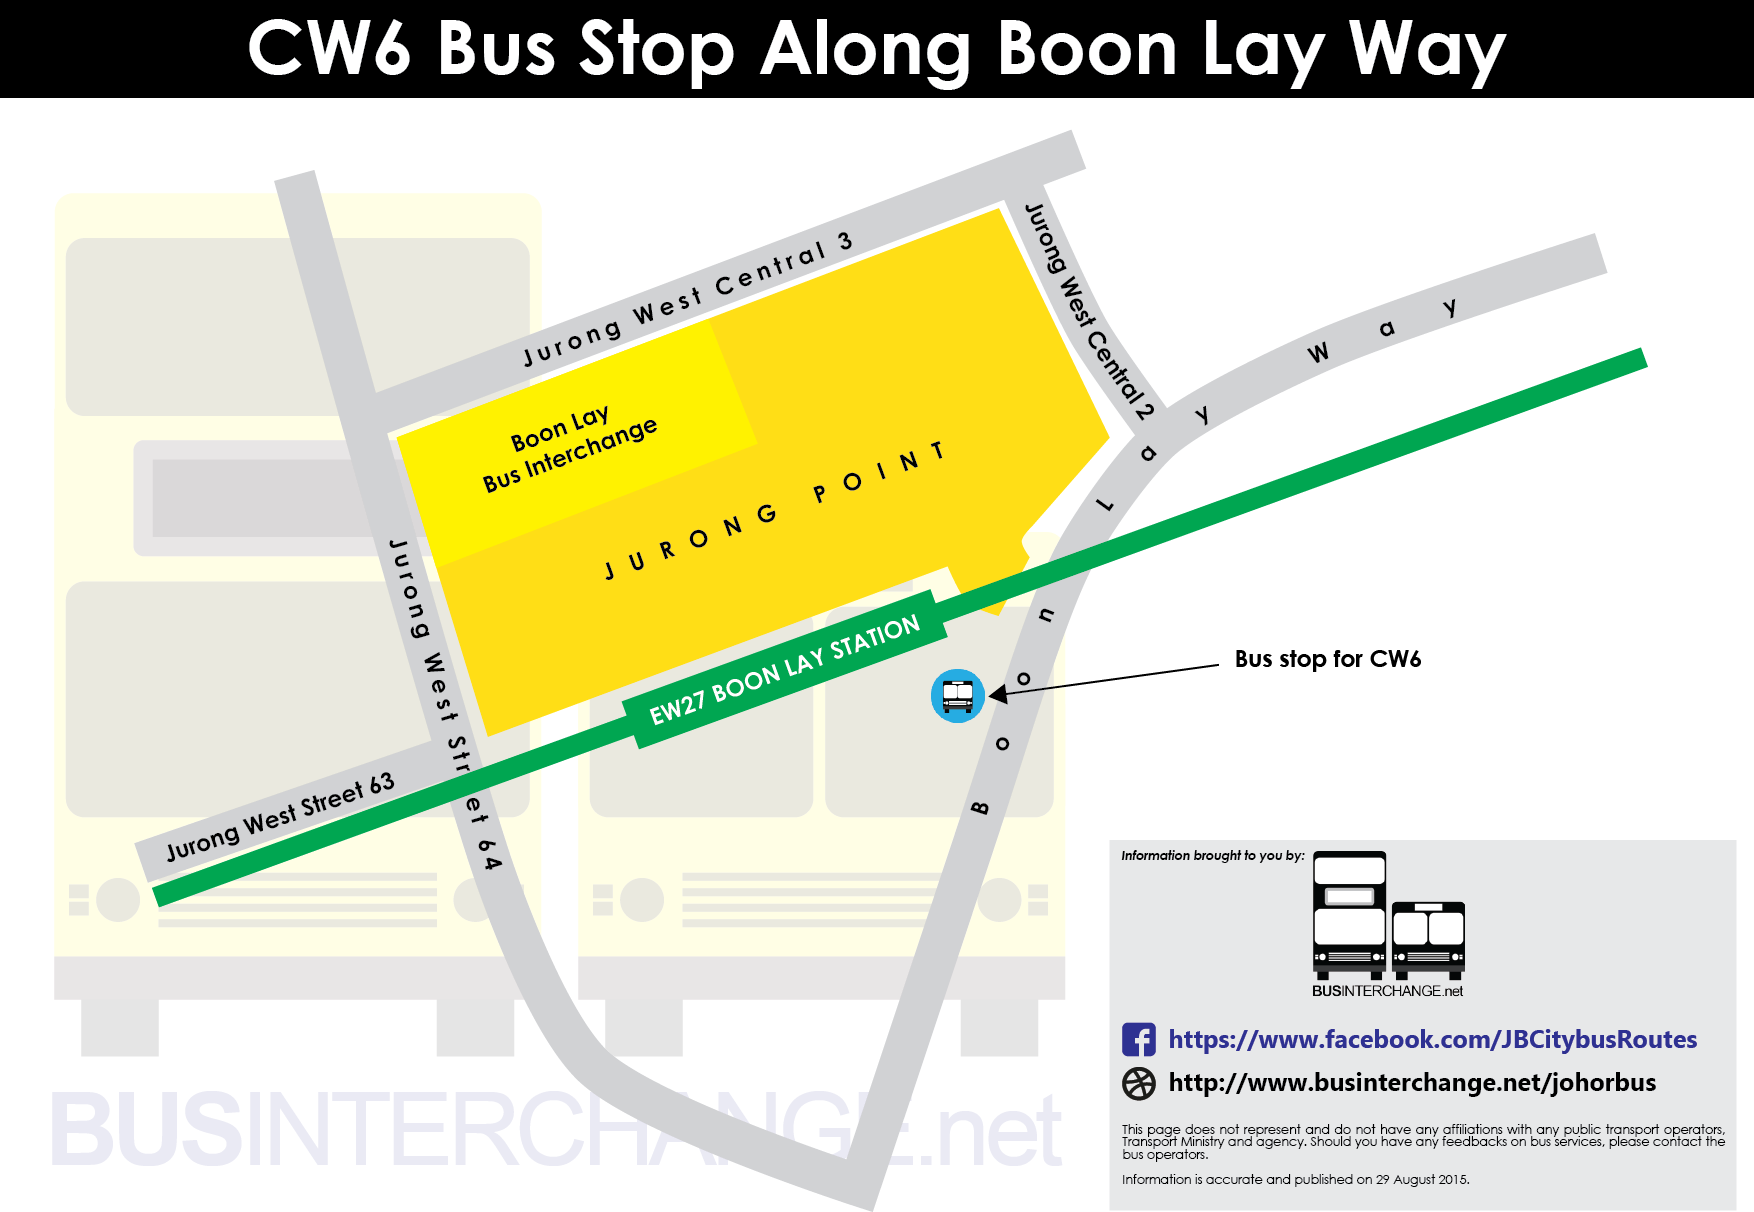 Boarding location at Boon Lay for CW6